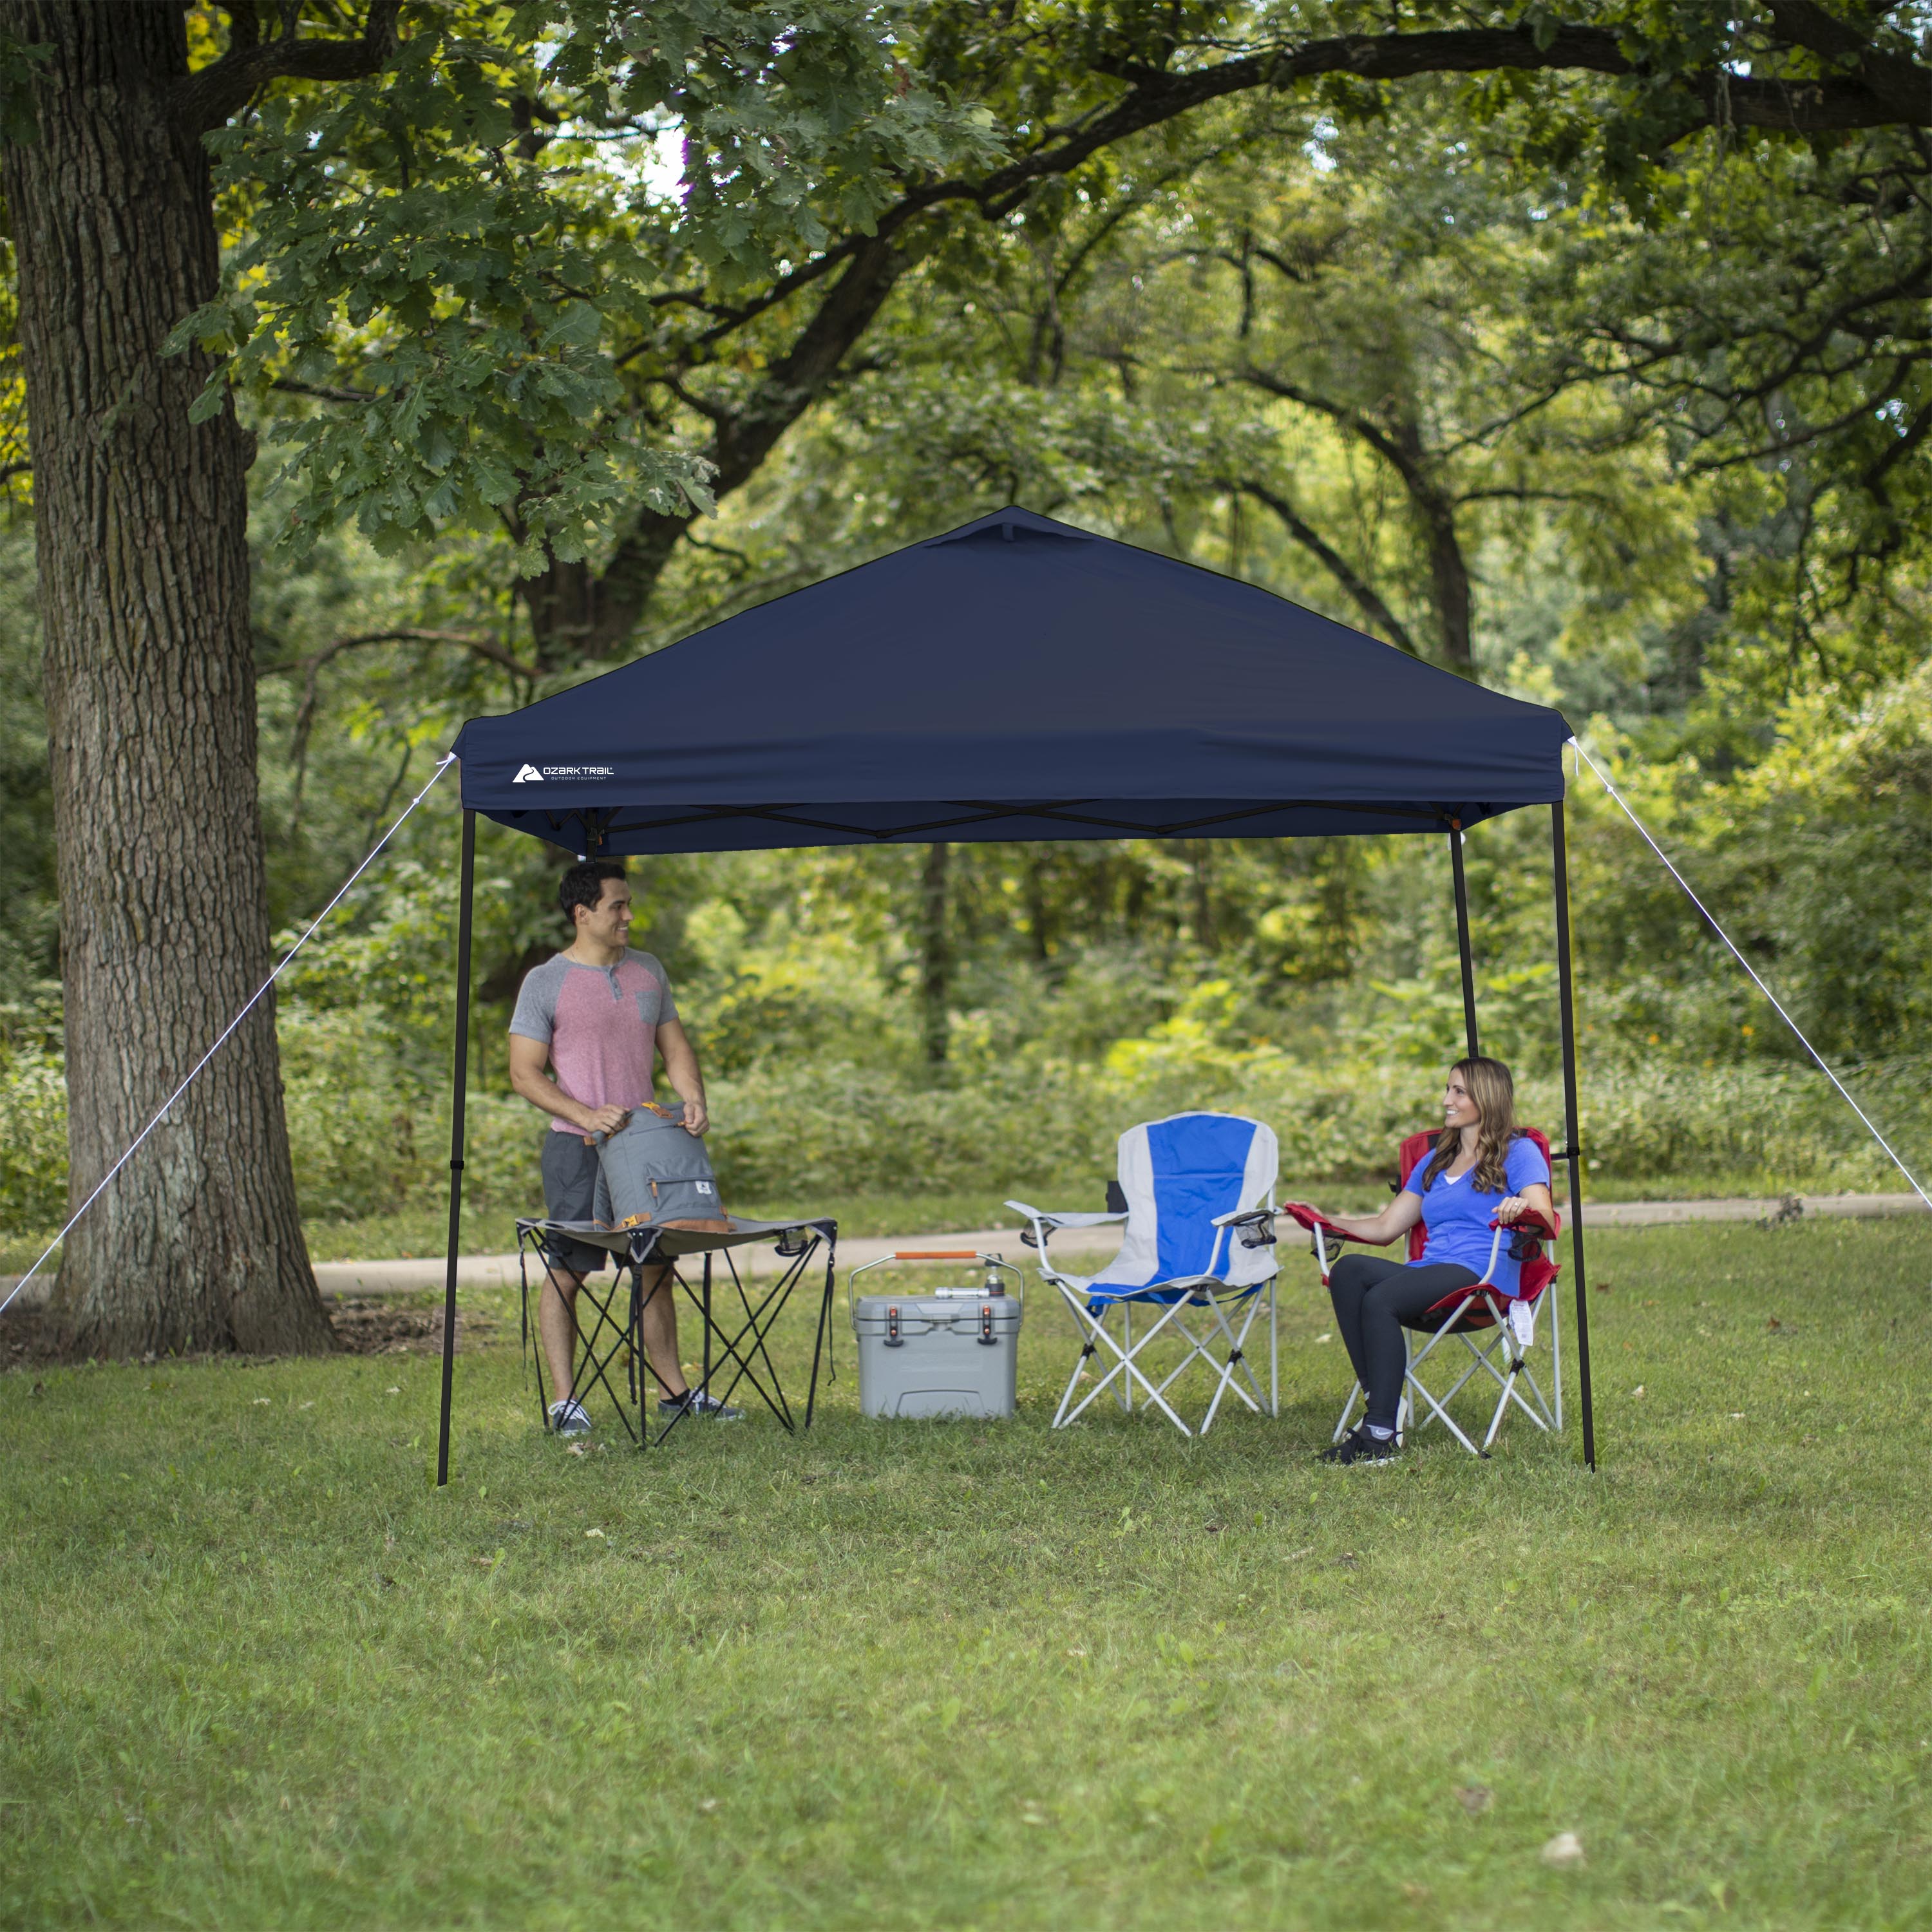 Ozark Trail 10' x 10' Navy Blue Instant Outdoor Canopy - image 2 of 6